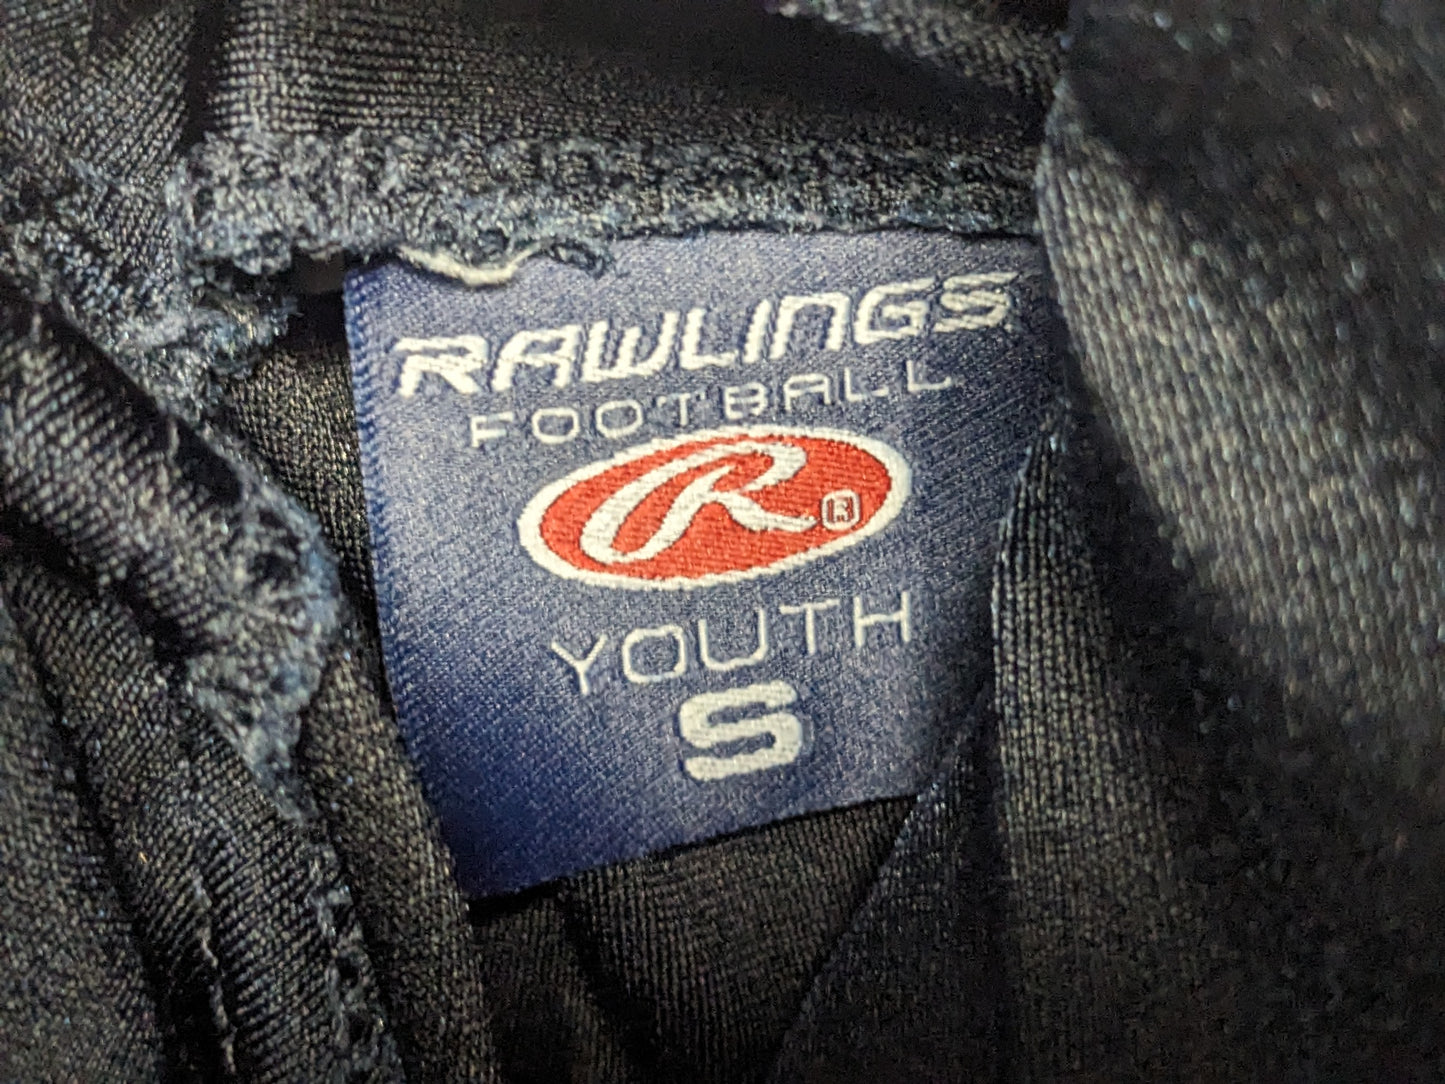 Rawlings Football Pants Size Youth Small Color Blue Condition Used